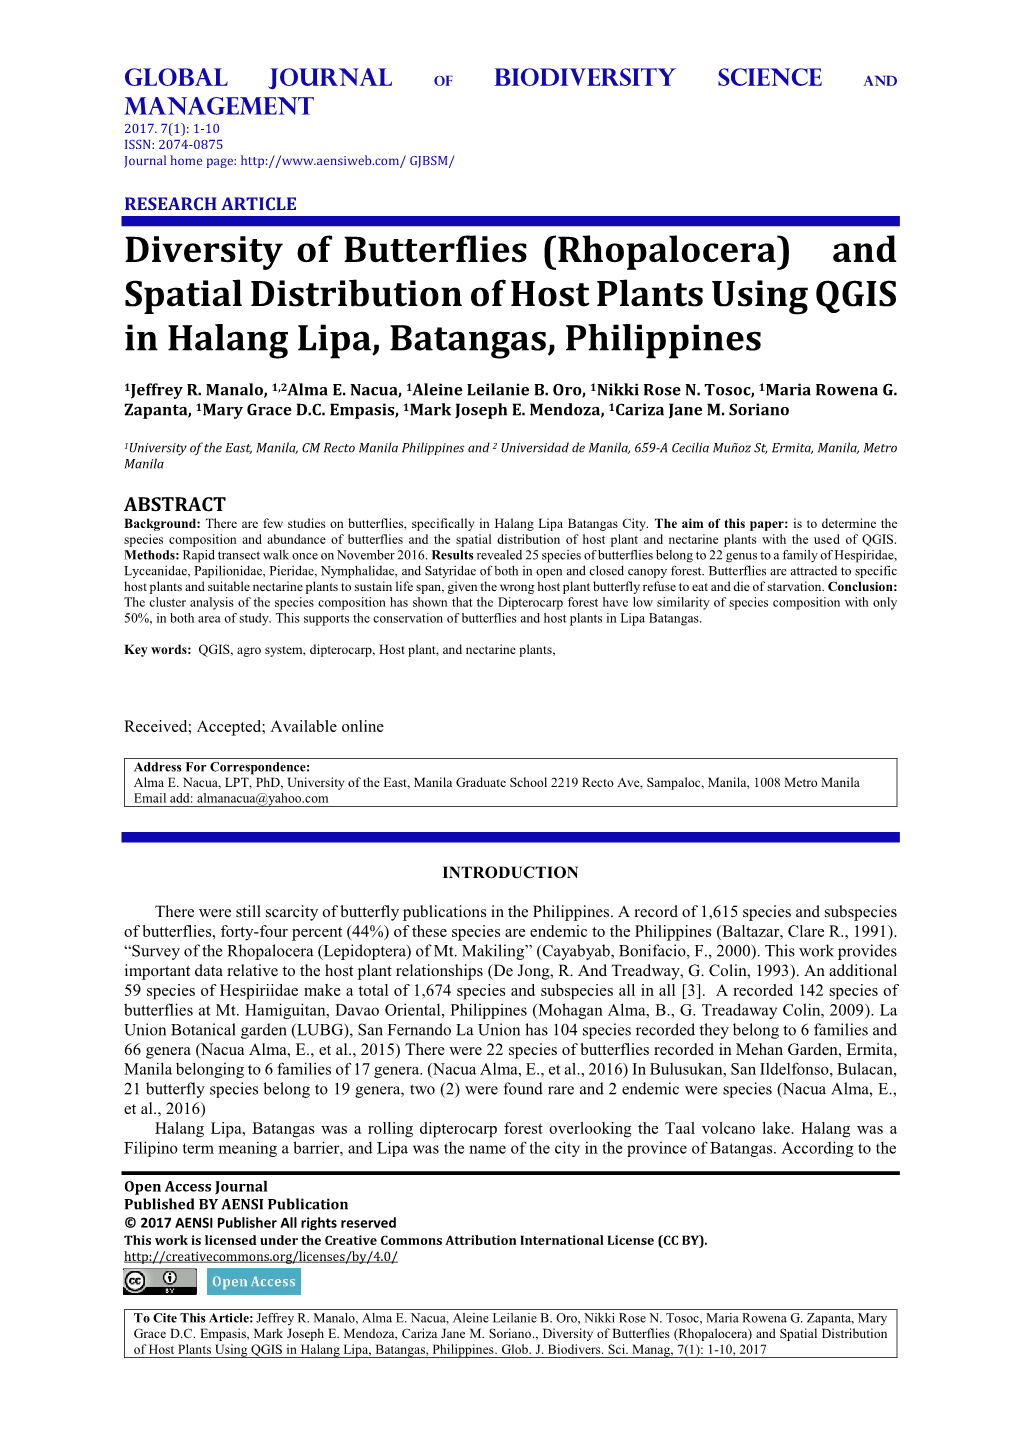 Diversity of Butterflies (Rhopalocera) and Spatial Distribution of Host Plants Using QGIS in Halang Lipa, Batangas, Philippines